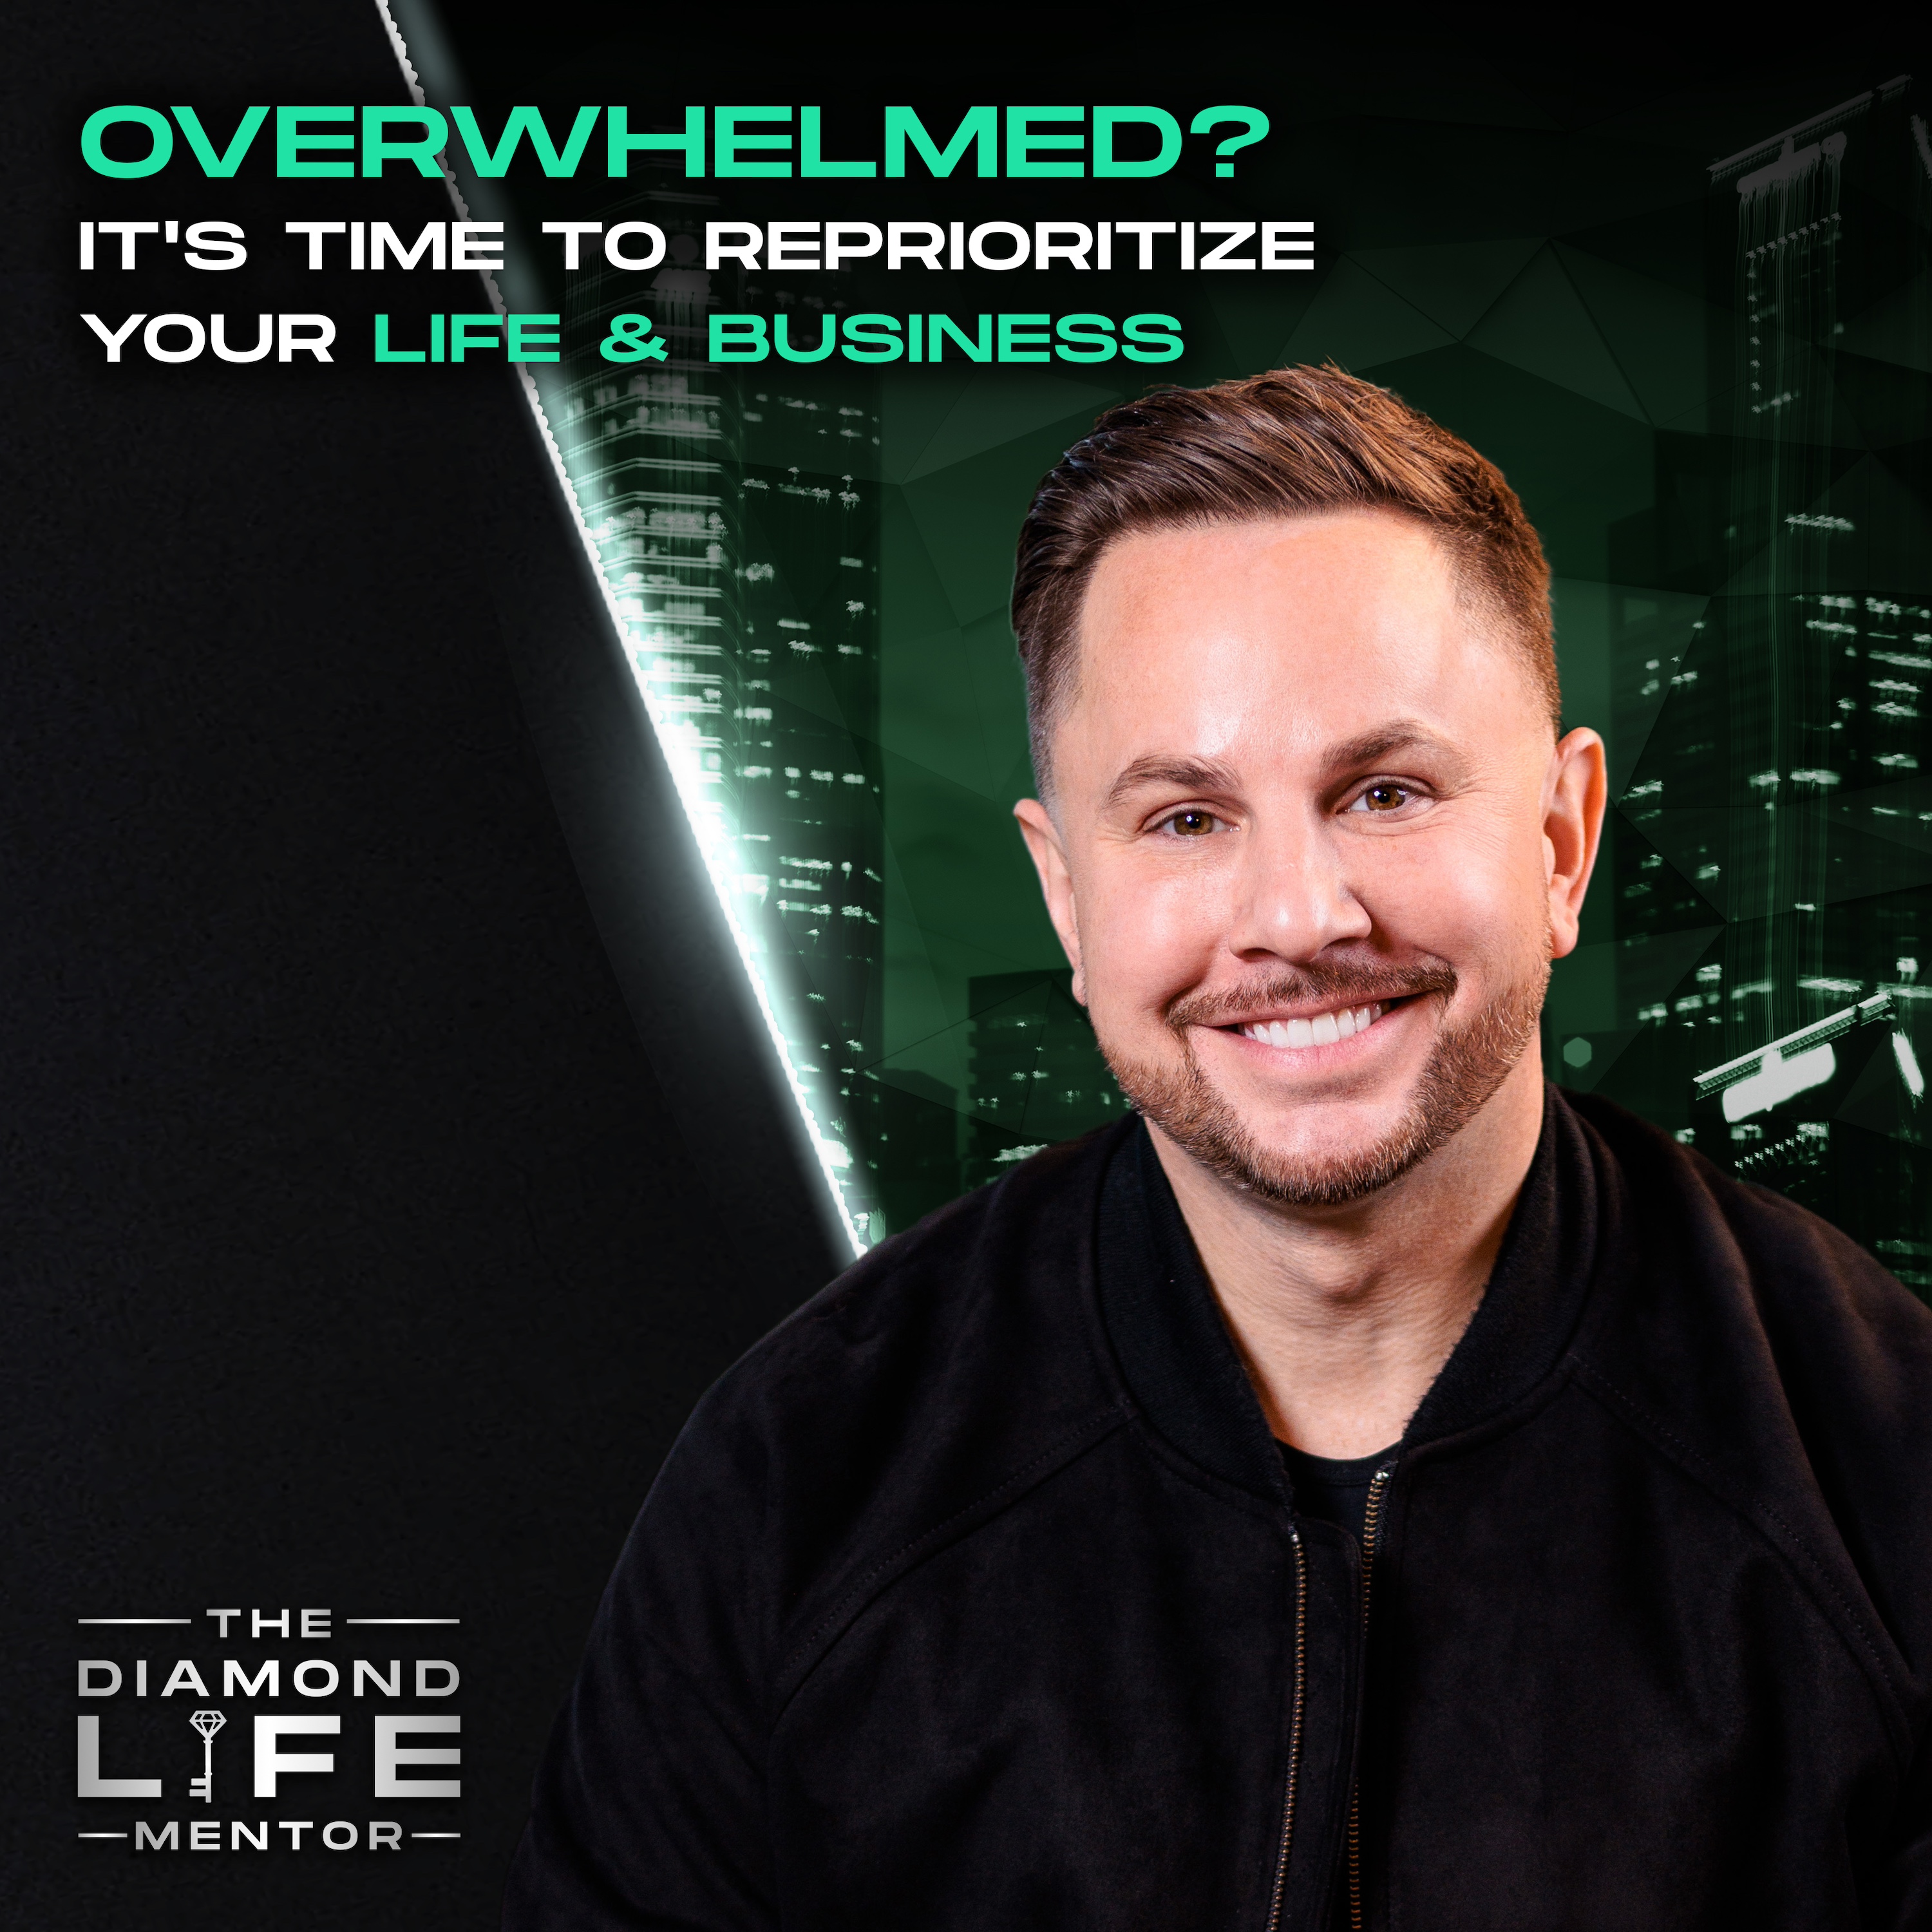 Overwhelmed? It's Time to Reprioritize Your Life & Business